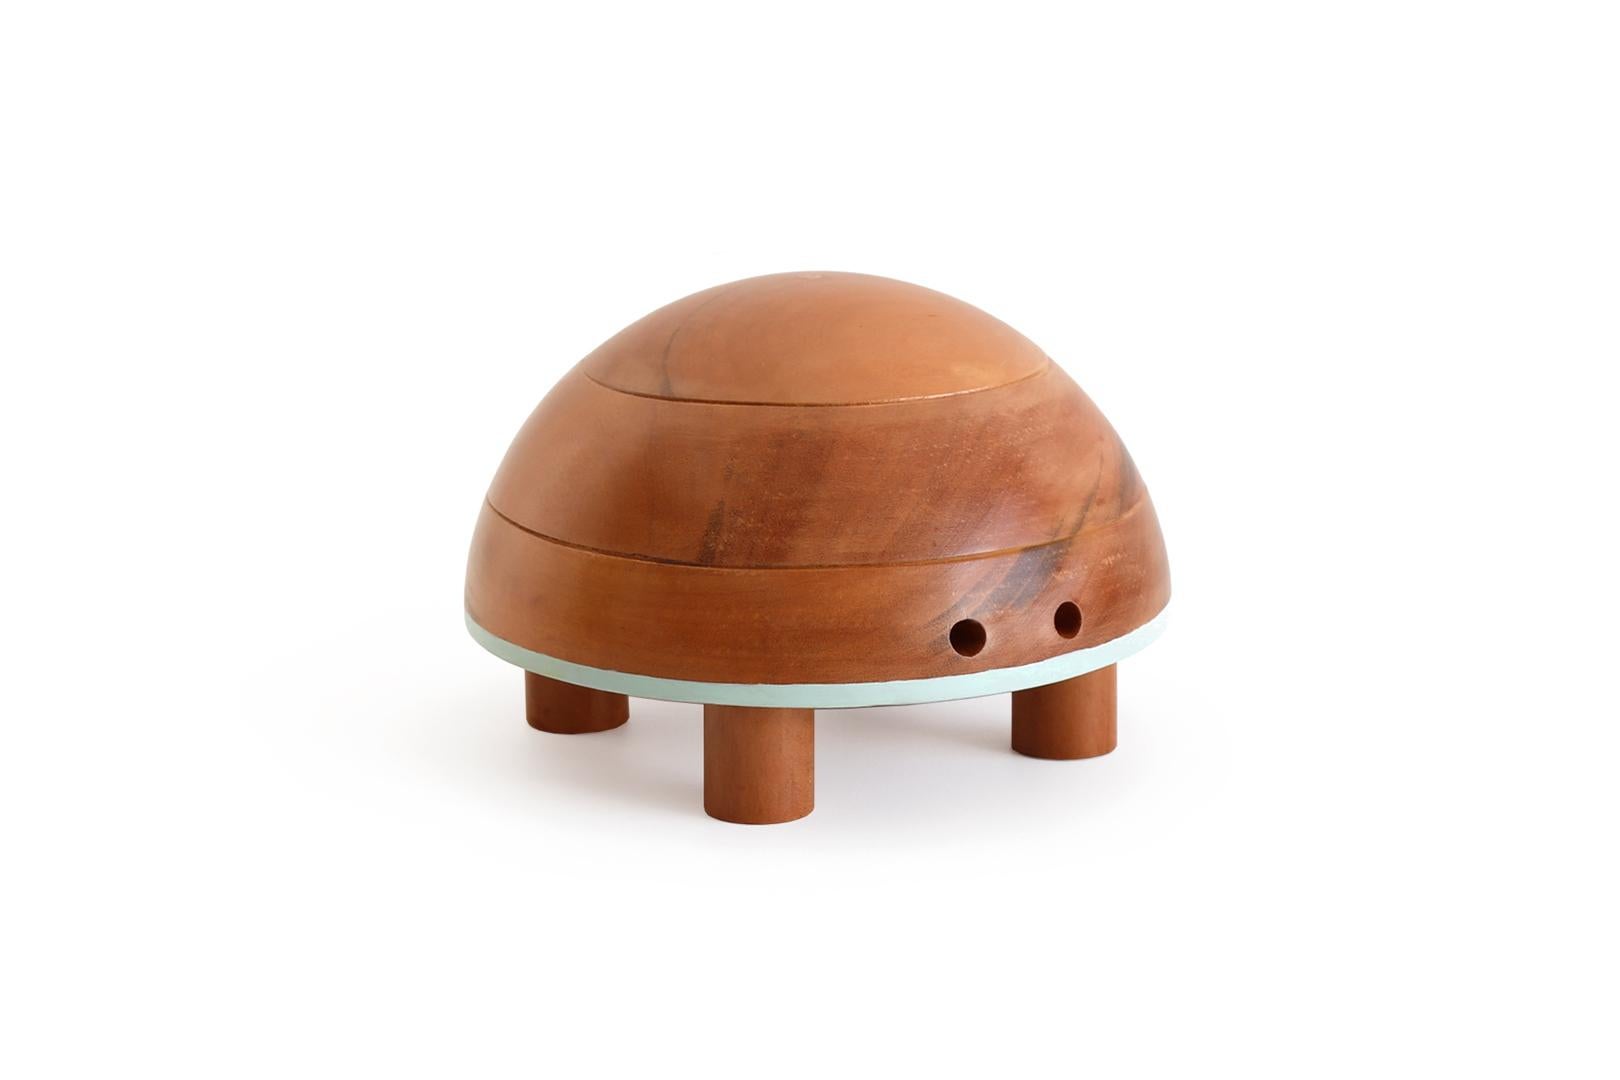 JABUTI (turtle in Portuguese) is part of Bichos do Brasil collection that is decorative and collectible objects of wooden figures that represent animals of the Brazilian Fauna.
The design of the collection translates into a balance between